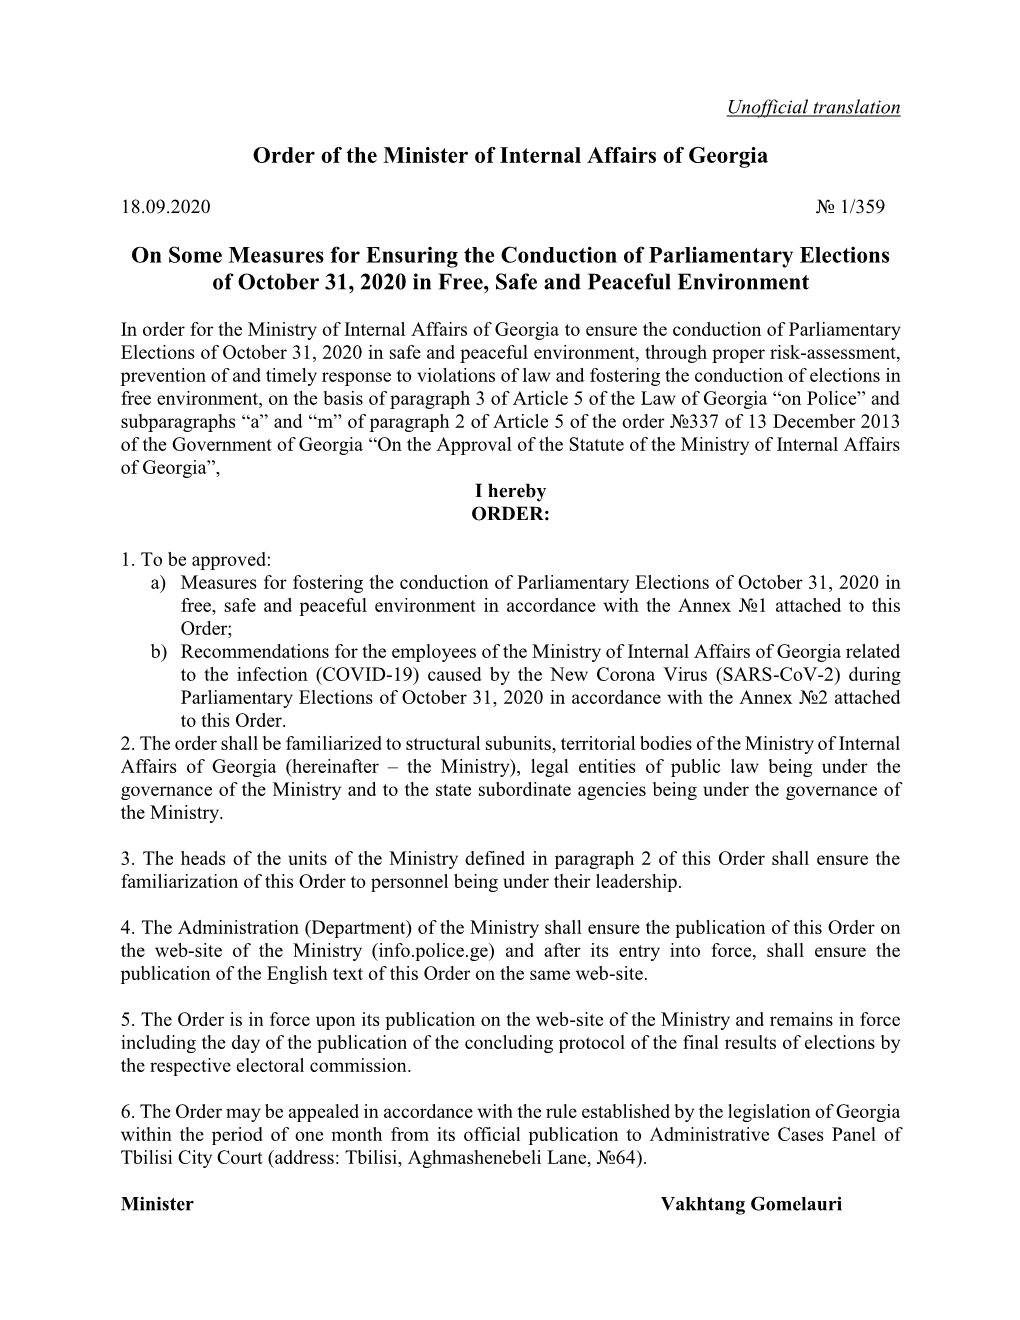 Order of the Minister of Internal Affairs of Georgia on Some Measures For